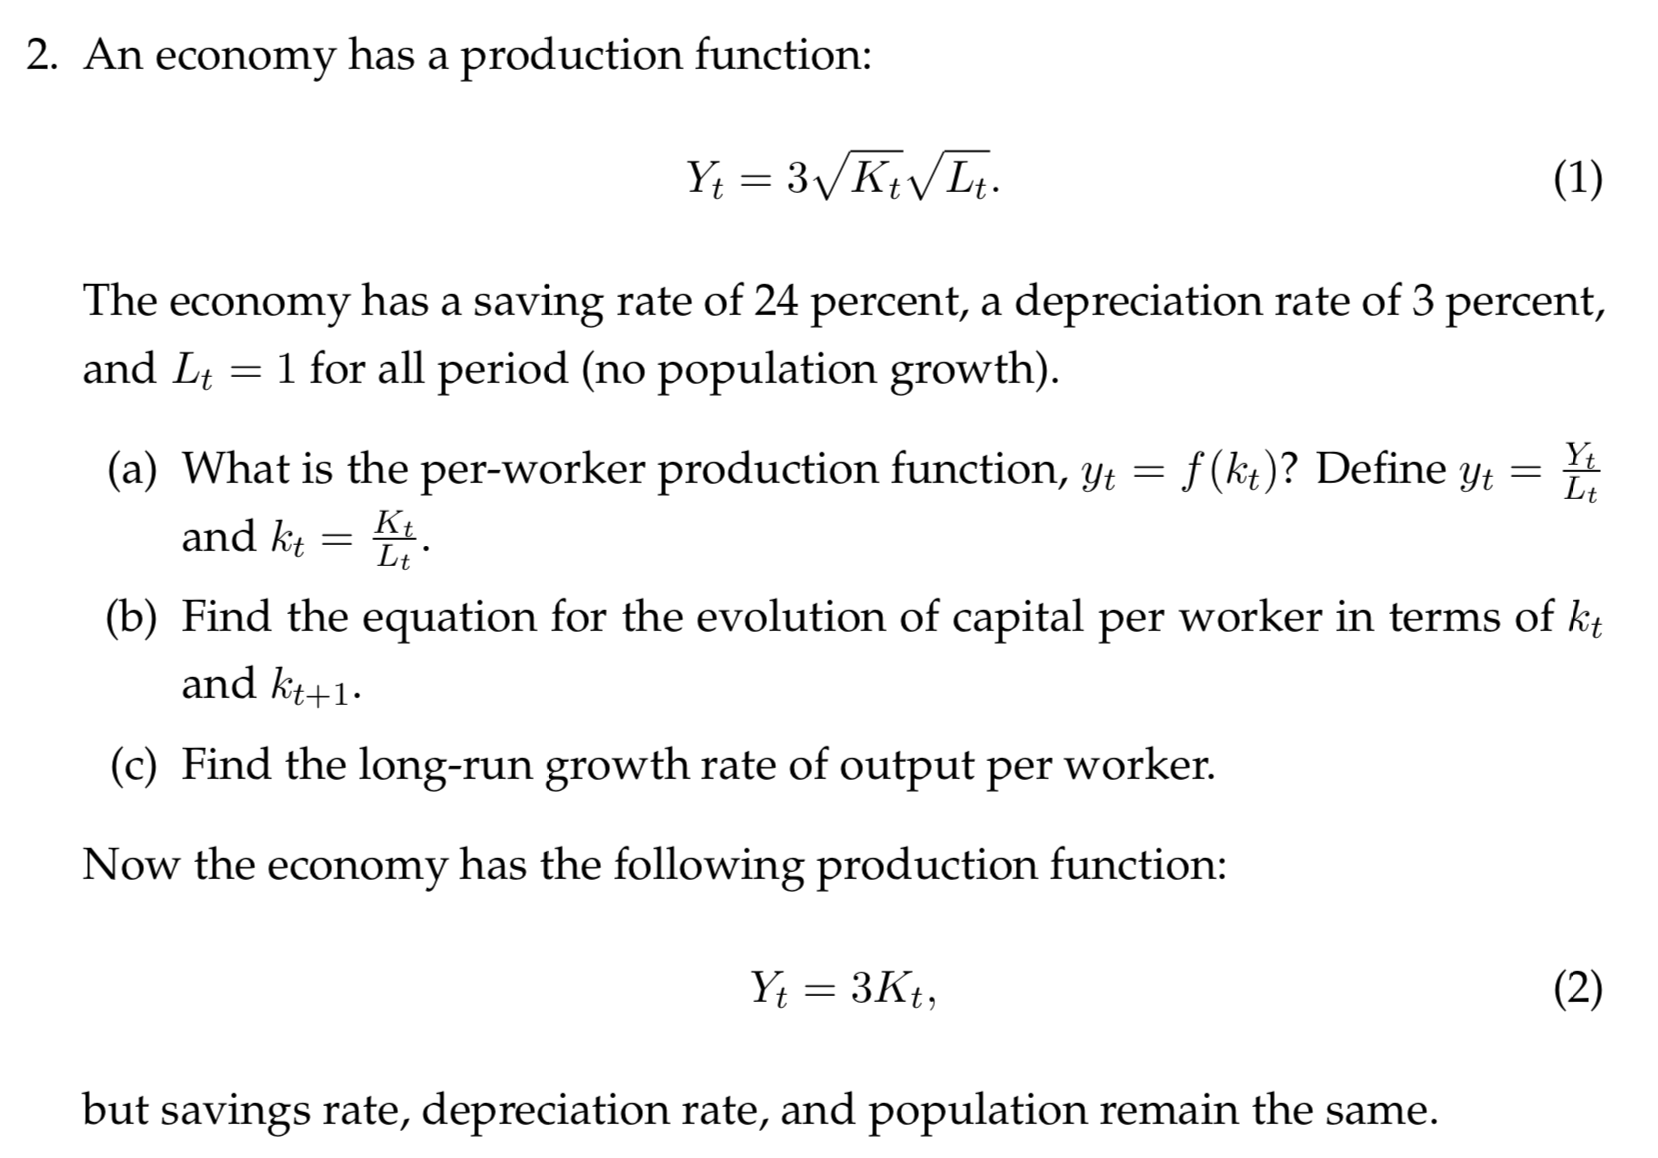 2. An economy has a production function:
Y 3KtLt.
(1)
The economy has a saving rate of 24 percent, a depreciation rate of 3 percent,
1 for all period (no population growth).
and Lt
Yt
Lt
(a) What is the per-worker production function, yt
f(kt)? Define yt
Ки
Lt
and kt
(b) Find the equation for the evolution of capital per worker in terms of kt
and kt+1
(c) Find the long-run growth rate of output per worker.
Now the economy has the following production function:
Y 3Kt
(2)
but savings rate, depreciation rate, and population remain the same
